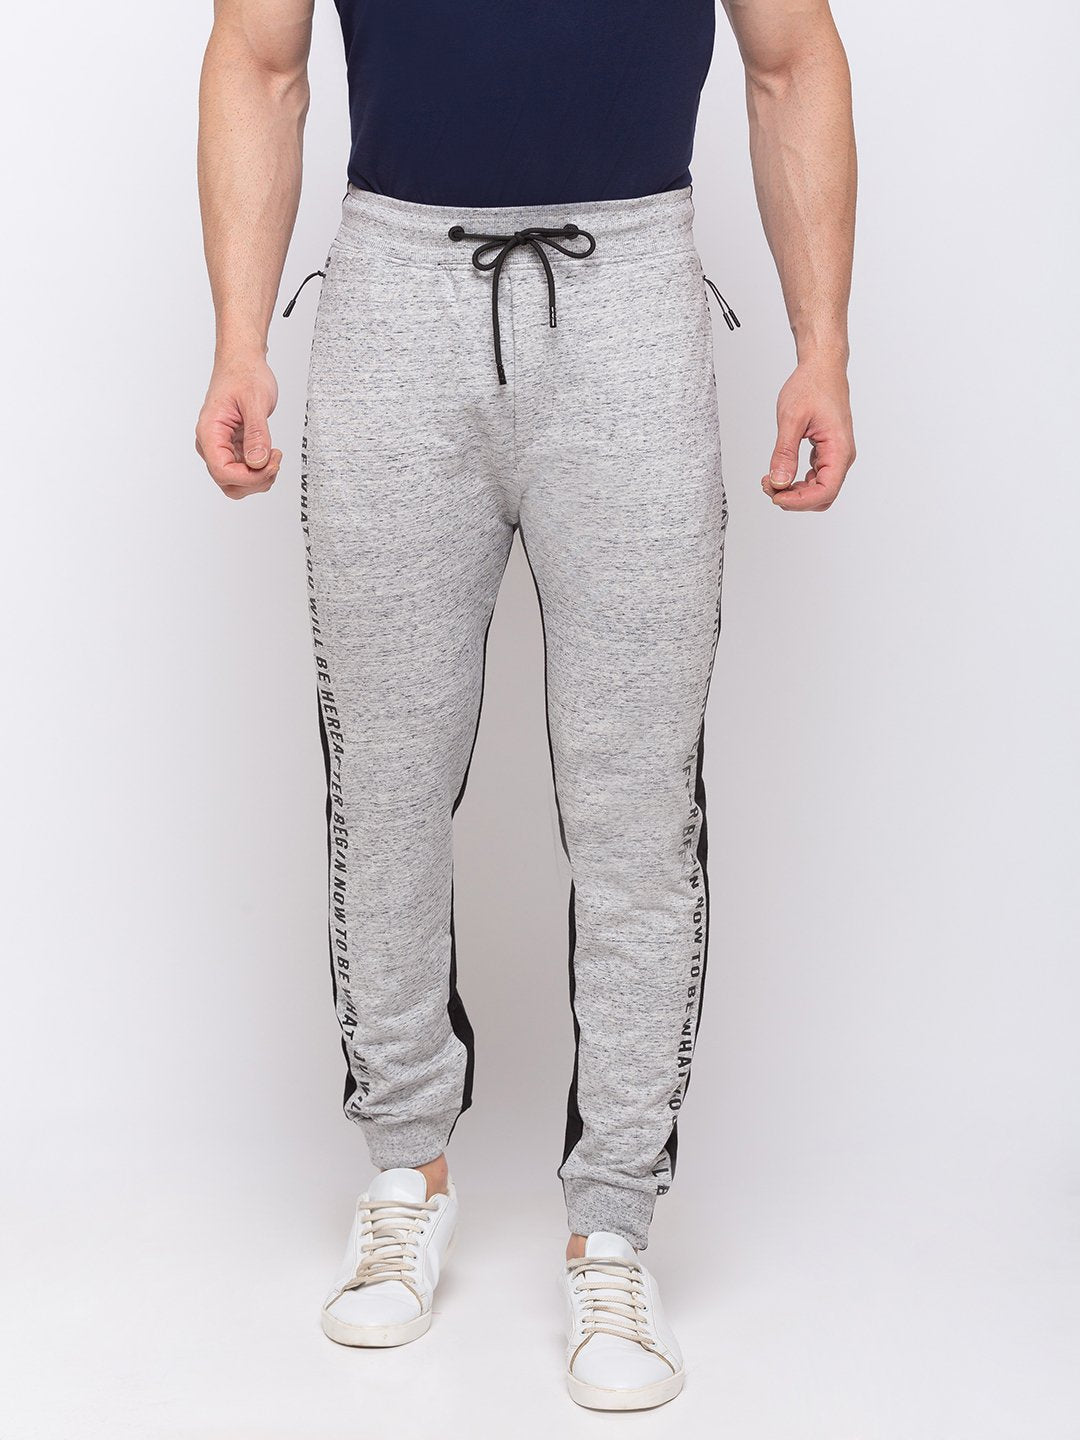 joggers for plus size